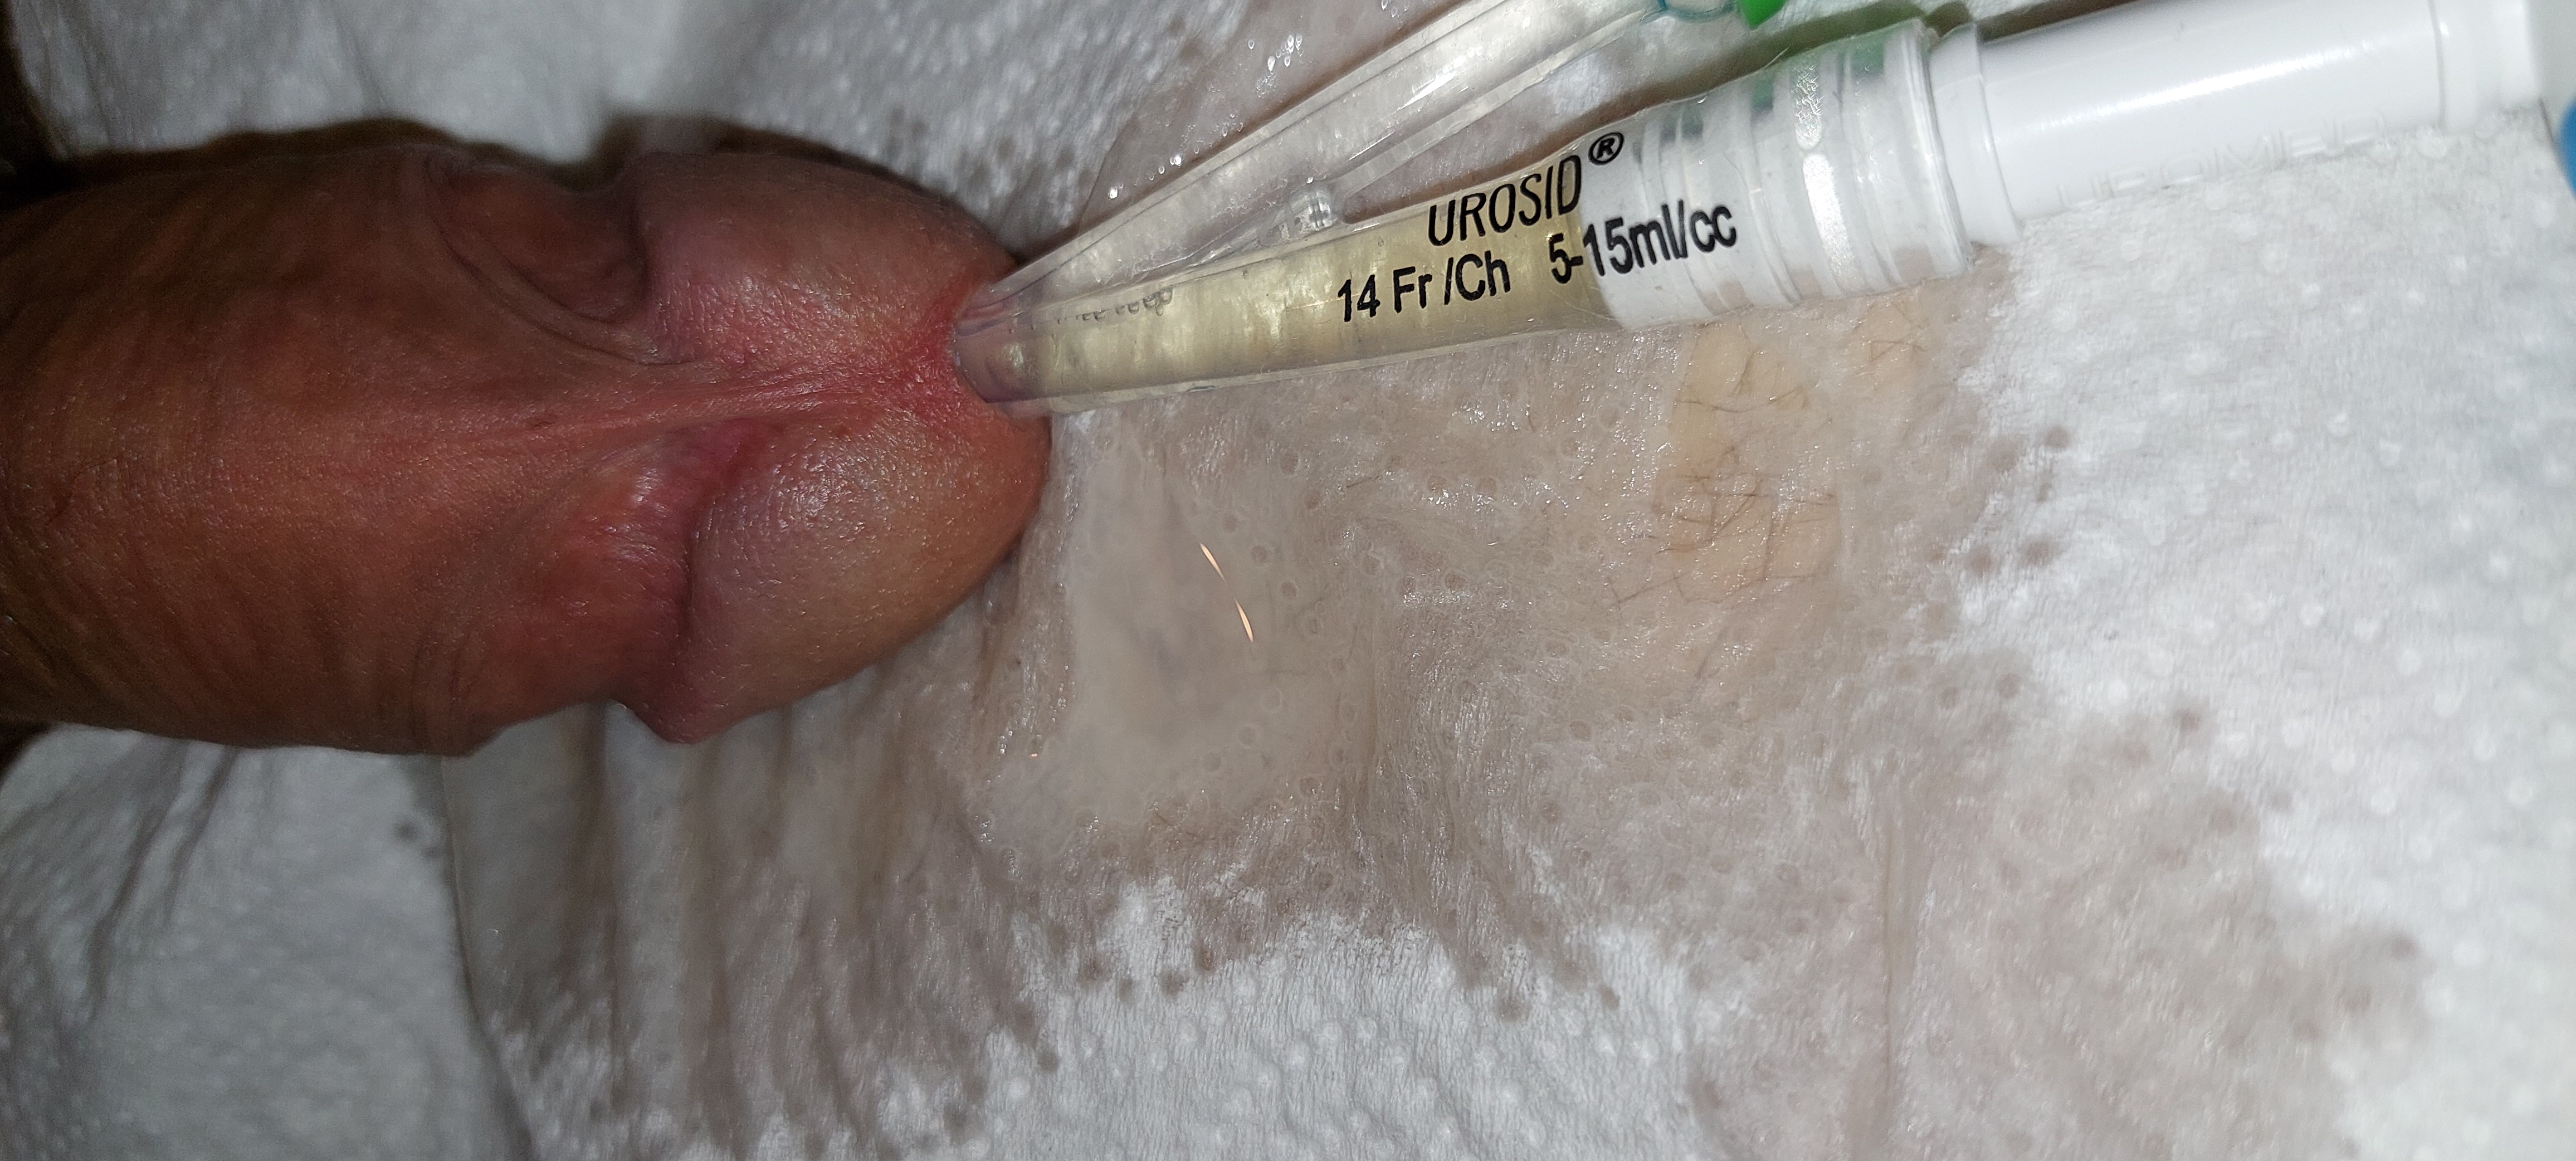 Day 2 silicone foley catheter relieve and orgasm: